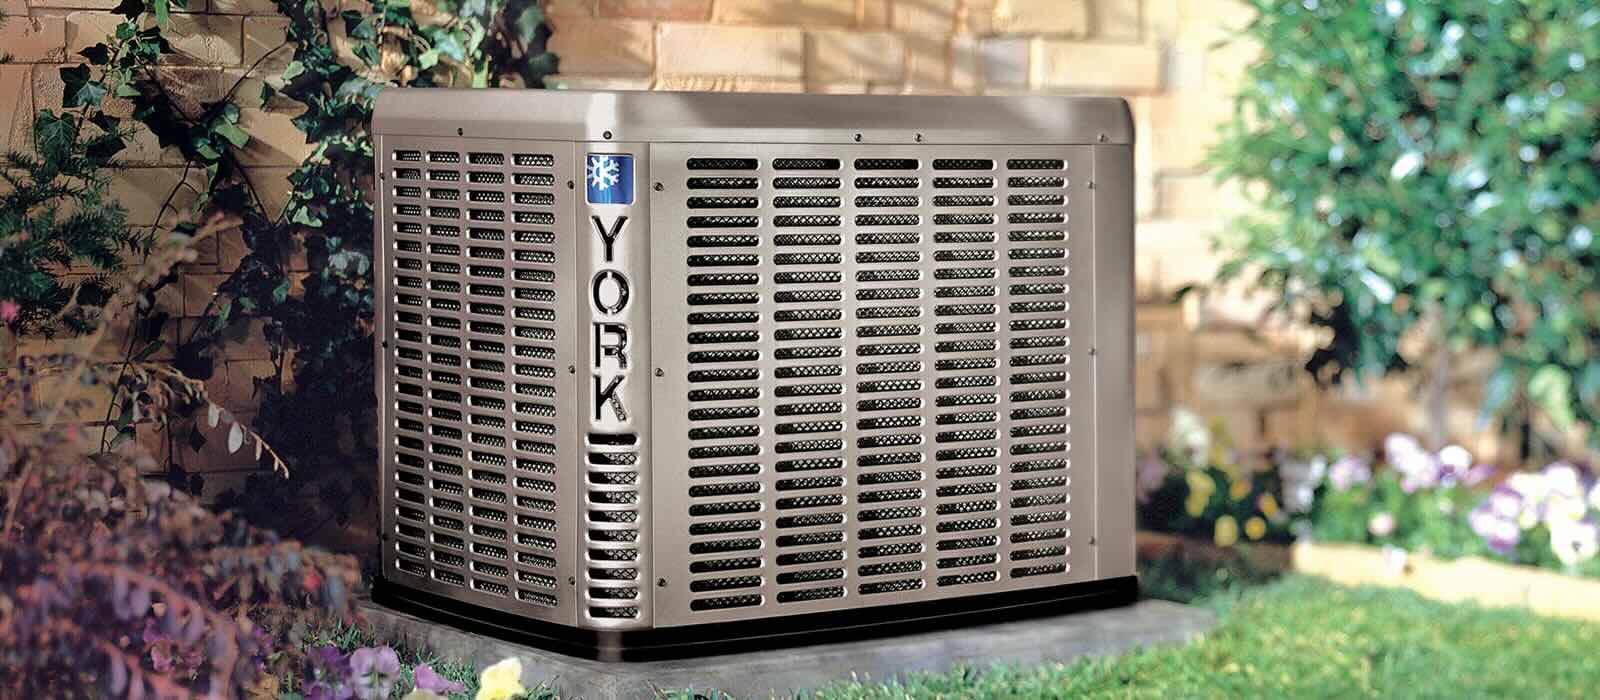 Where Is The Reset Button On A York Air Conditioner